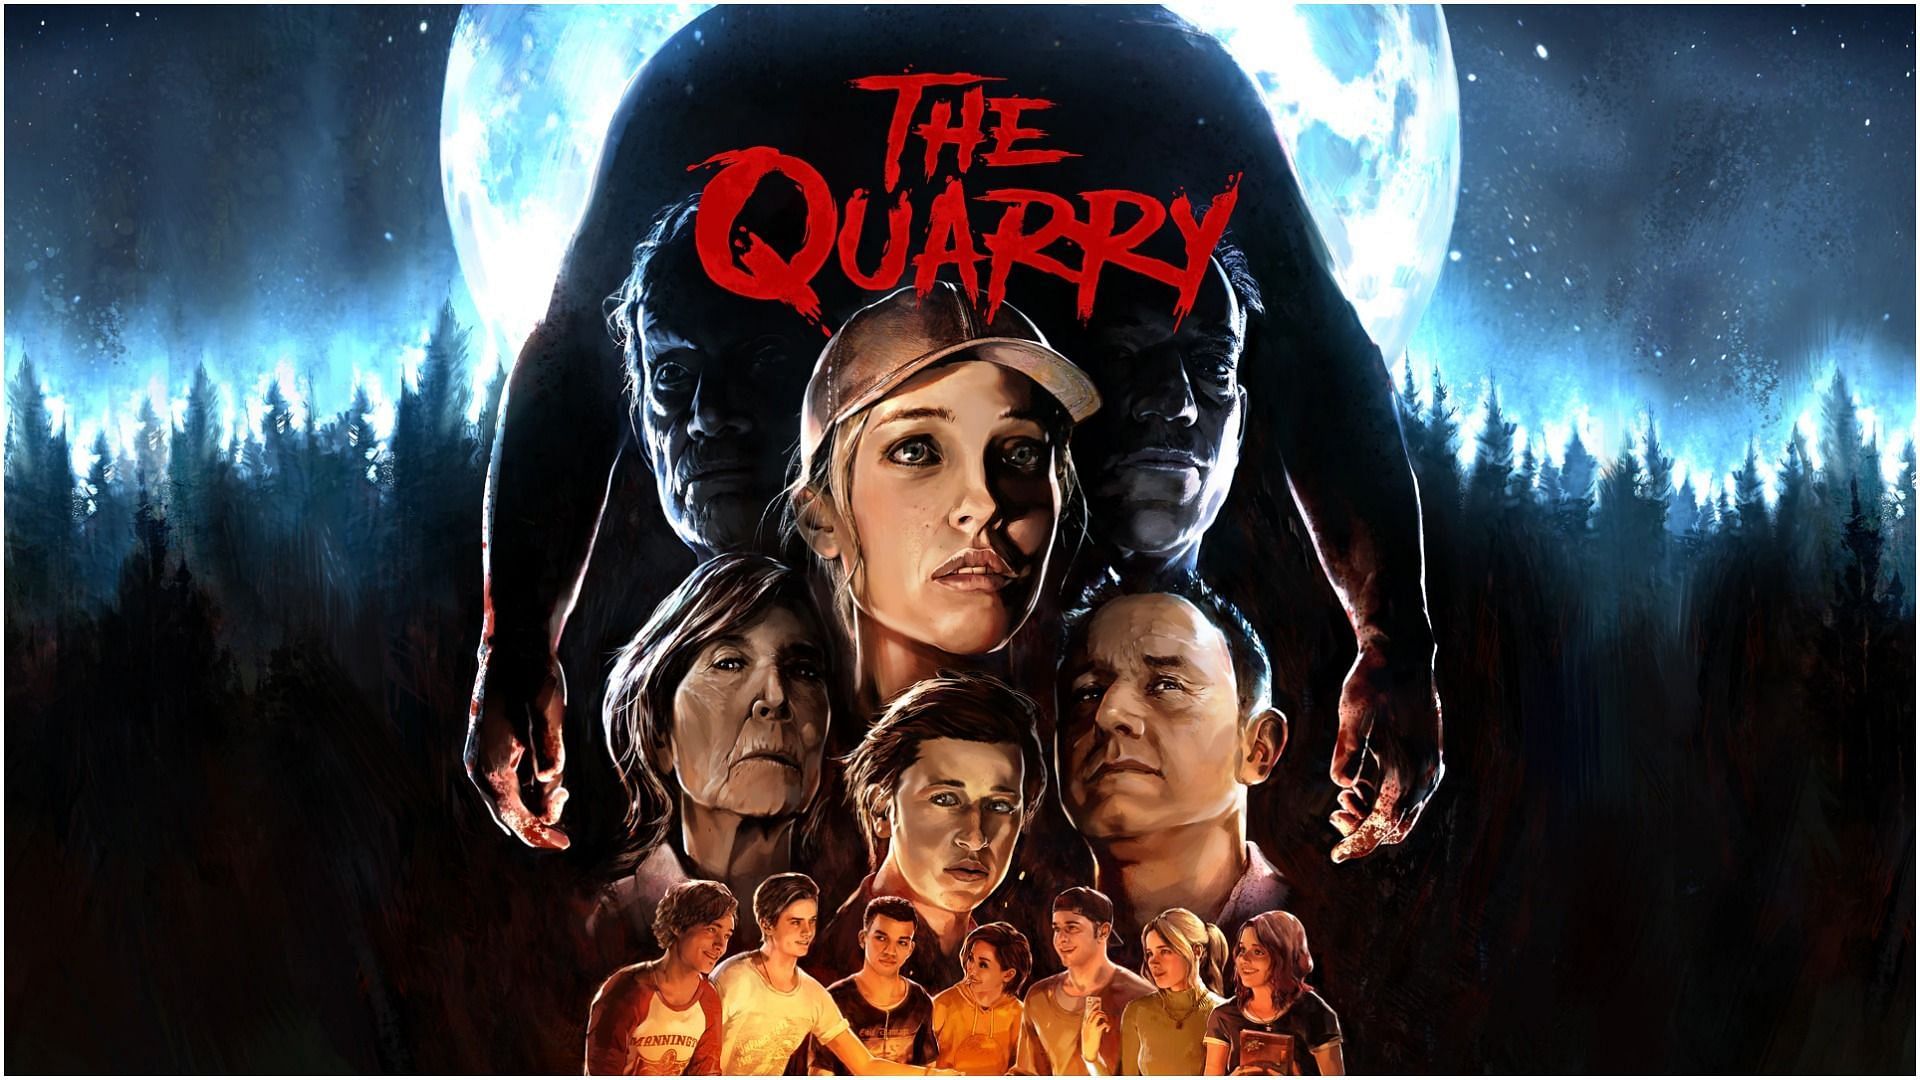 Players will take control of a cast of horror movie characters in the game (Image via PlayStation Store)